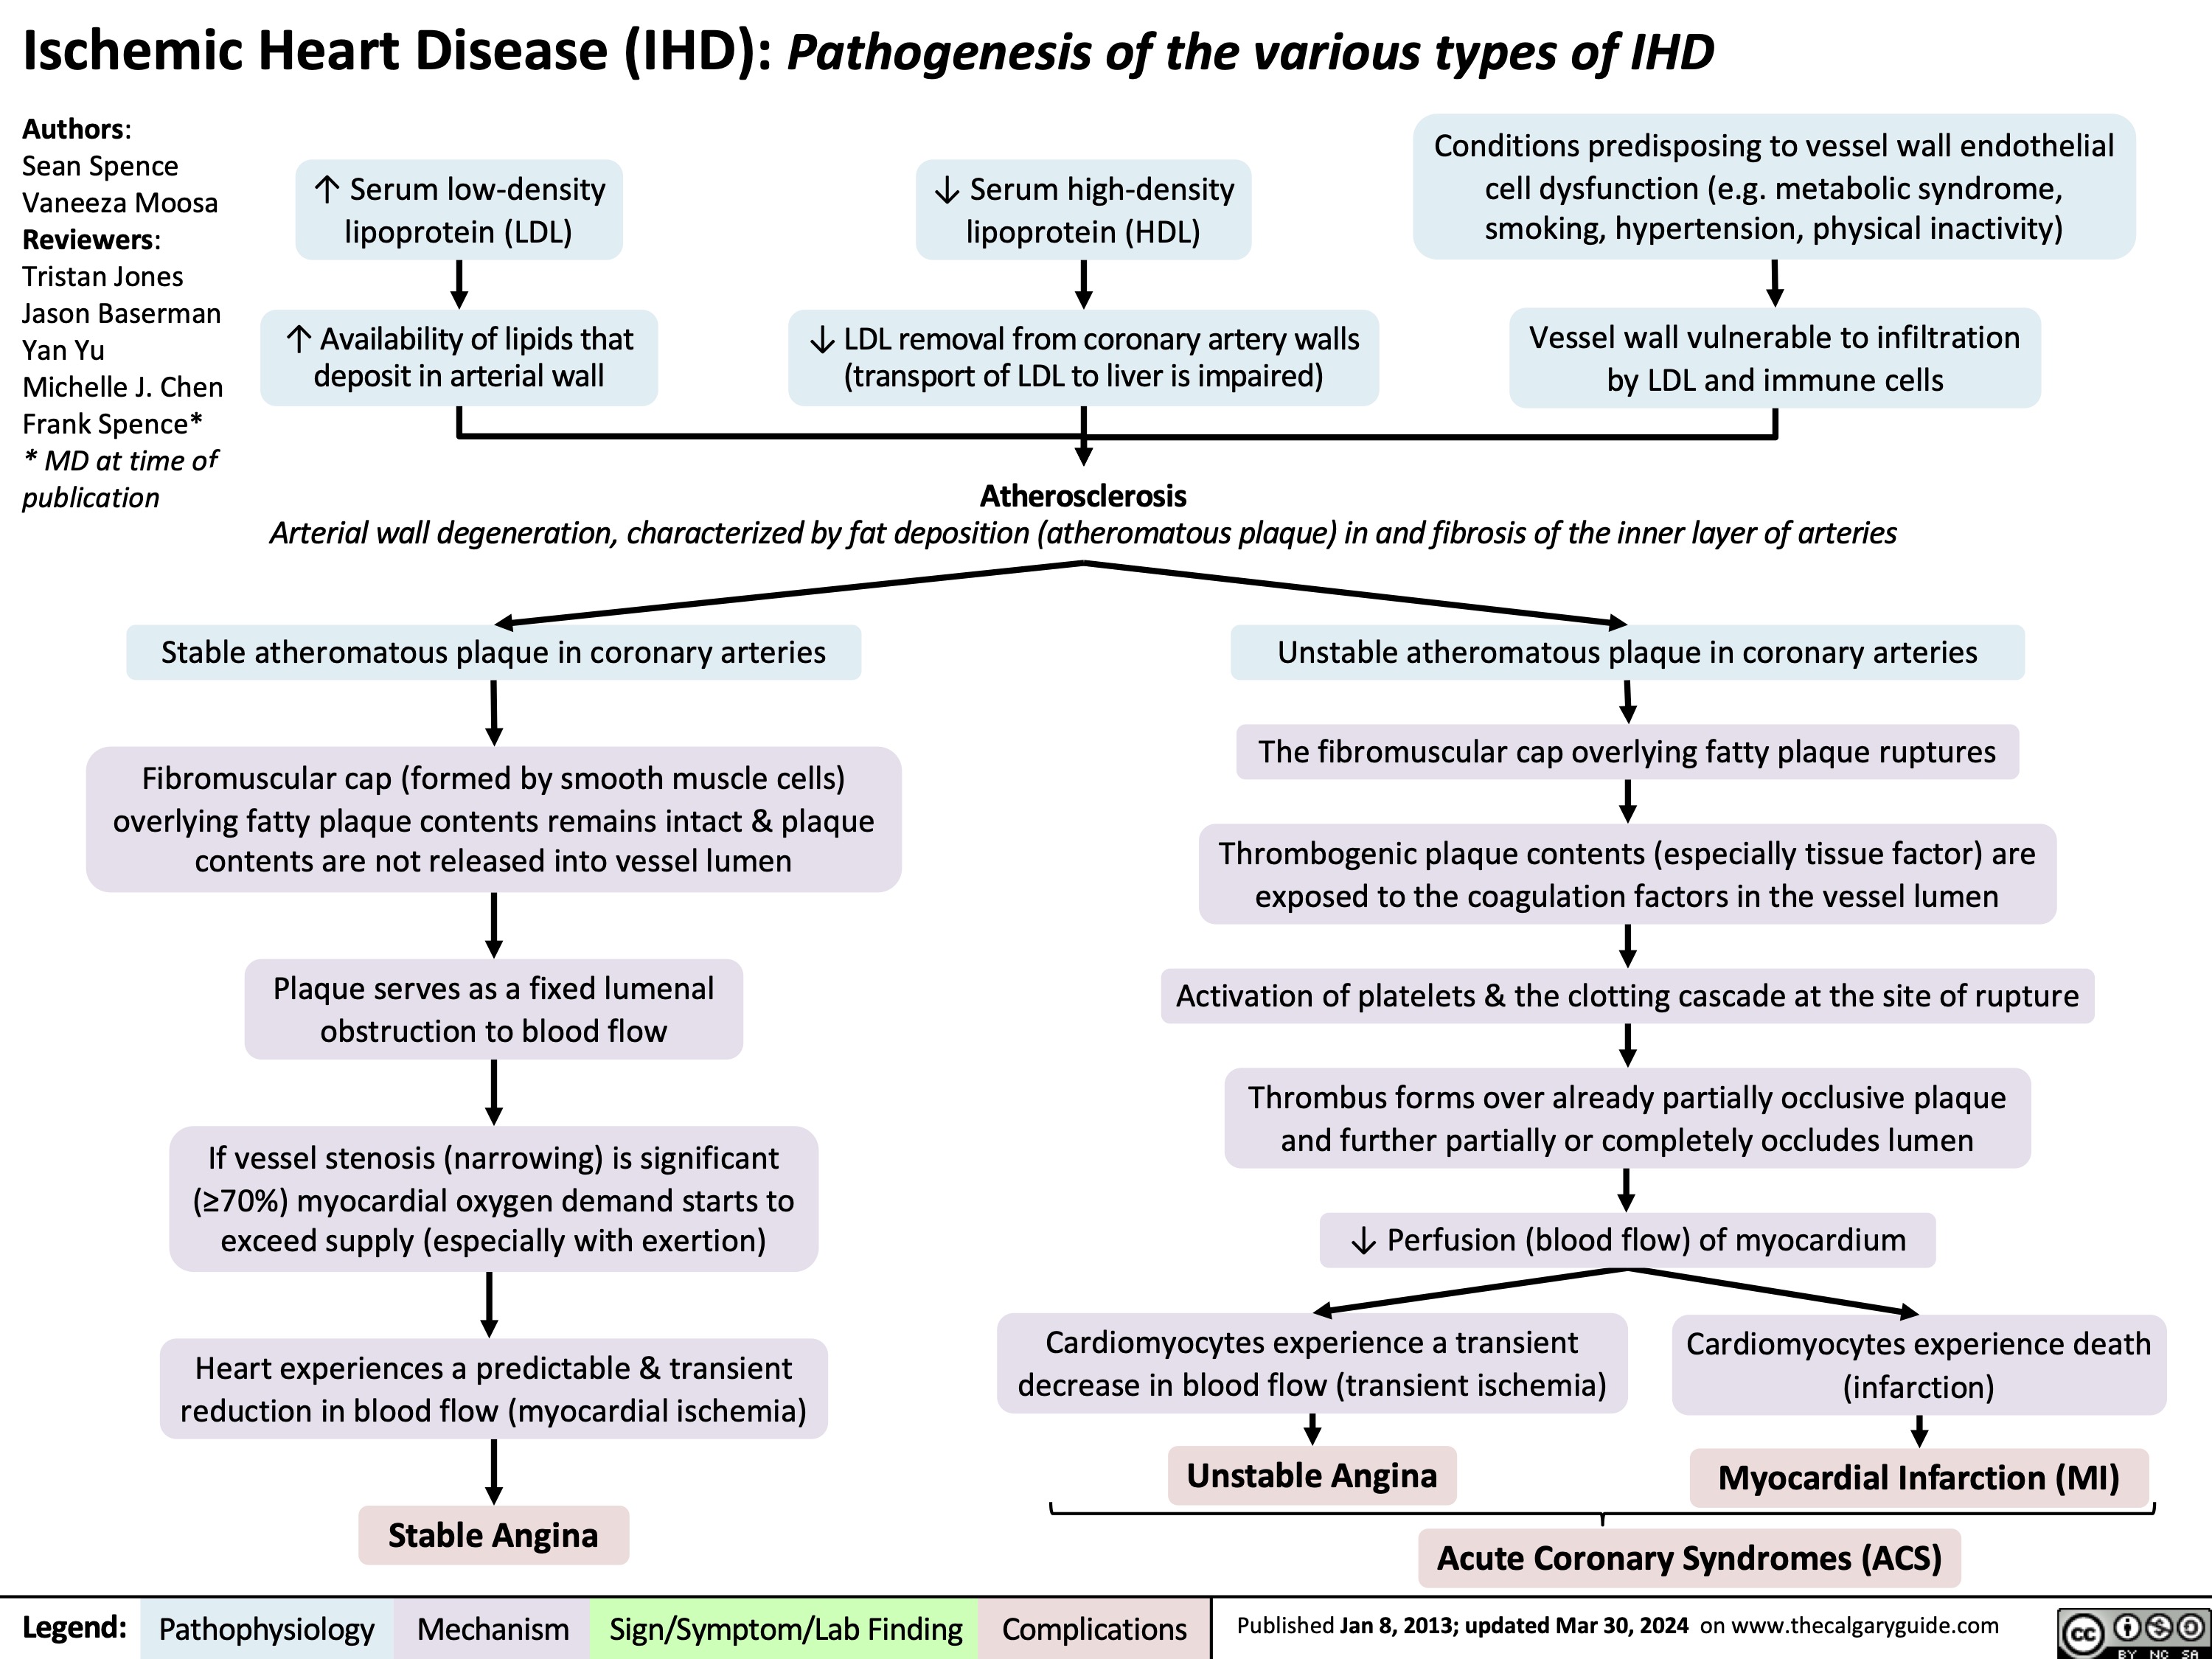 Ischemic Heart Disease (IHD): Pathogenesis of the various types of IHD
Authors:
Sean Spence Vaneeza Moosa Reviewers: Tristan Jones Jason Baserman Yan Yu
Michelle J. Chen Frank Spence* * MD at time of publication
↑ Serum low-density lipoprotein (LDL)
↑ Availability of lipids that deposit in arterial wall
↓ Serum high-density lipoprotein (HDL)
↓ LDL removal from coronary artery walls (transport of LDL to liver is impaired)
Atherosclerosis
Conditions predisposing to vessel wall endothelial cell dysfunction (e.g. metabolic syndrome, smoking, hypertension, physical inactivity)
Vessel wall vulnerable to infiltration by LDL and immune cells
         Arterial wall degeneration, characterized by fat deposition (atheromatous plaque) in and fibrosis of the inner layer of arteries
    Stable atheromatous plaque in coronary arteries
Fibromuscular cap (formed by smooth muscle cells) overlying fatty plaque contents remains intact & plaque contents are not released into vessel lumen
Plaque serves as a fixed lumenal obstruction to blood flow
If vessel stenosis (narrowing) is significant (≥70%) myocardial oxygen demand starts to exceed supply (especially with exertion)
Heart experiences a predictable & transient reduction in blood flow (myocardial ischemia)
Unstable atheromatous plaque in coronary arteries
The fibromuscular cap overlying fatty plaque ruptures
Thrombogenic plaque contents (especially tissue factor) are exposed to the coagulation factors in the vessel lumen
Activation of platelets & the clotting cascade at the site of rupture
Thrombus forms over already partially occlusive plaque and further partially or completely occludes lumen
↓ Perfusion (blood flow) of myocardium
           Cardiomyocytes experience a transient decrease in blood flow (transient ischemia)
Unstable Angina
Cardiomyocytes experience death (infarction)
Myocardial Infarction (MI)
     Stable Angina
Acute Coronary Syndromes (ACS)
  Legend:
 Pathophysiology
 Mechanism
Sign/Symptom/Lab Finding
 Complications
 Published Jan 8, 2013; updated Mar 30, 2024 on www.thecalgaryguide.com
  